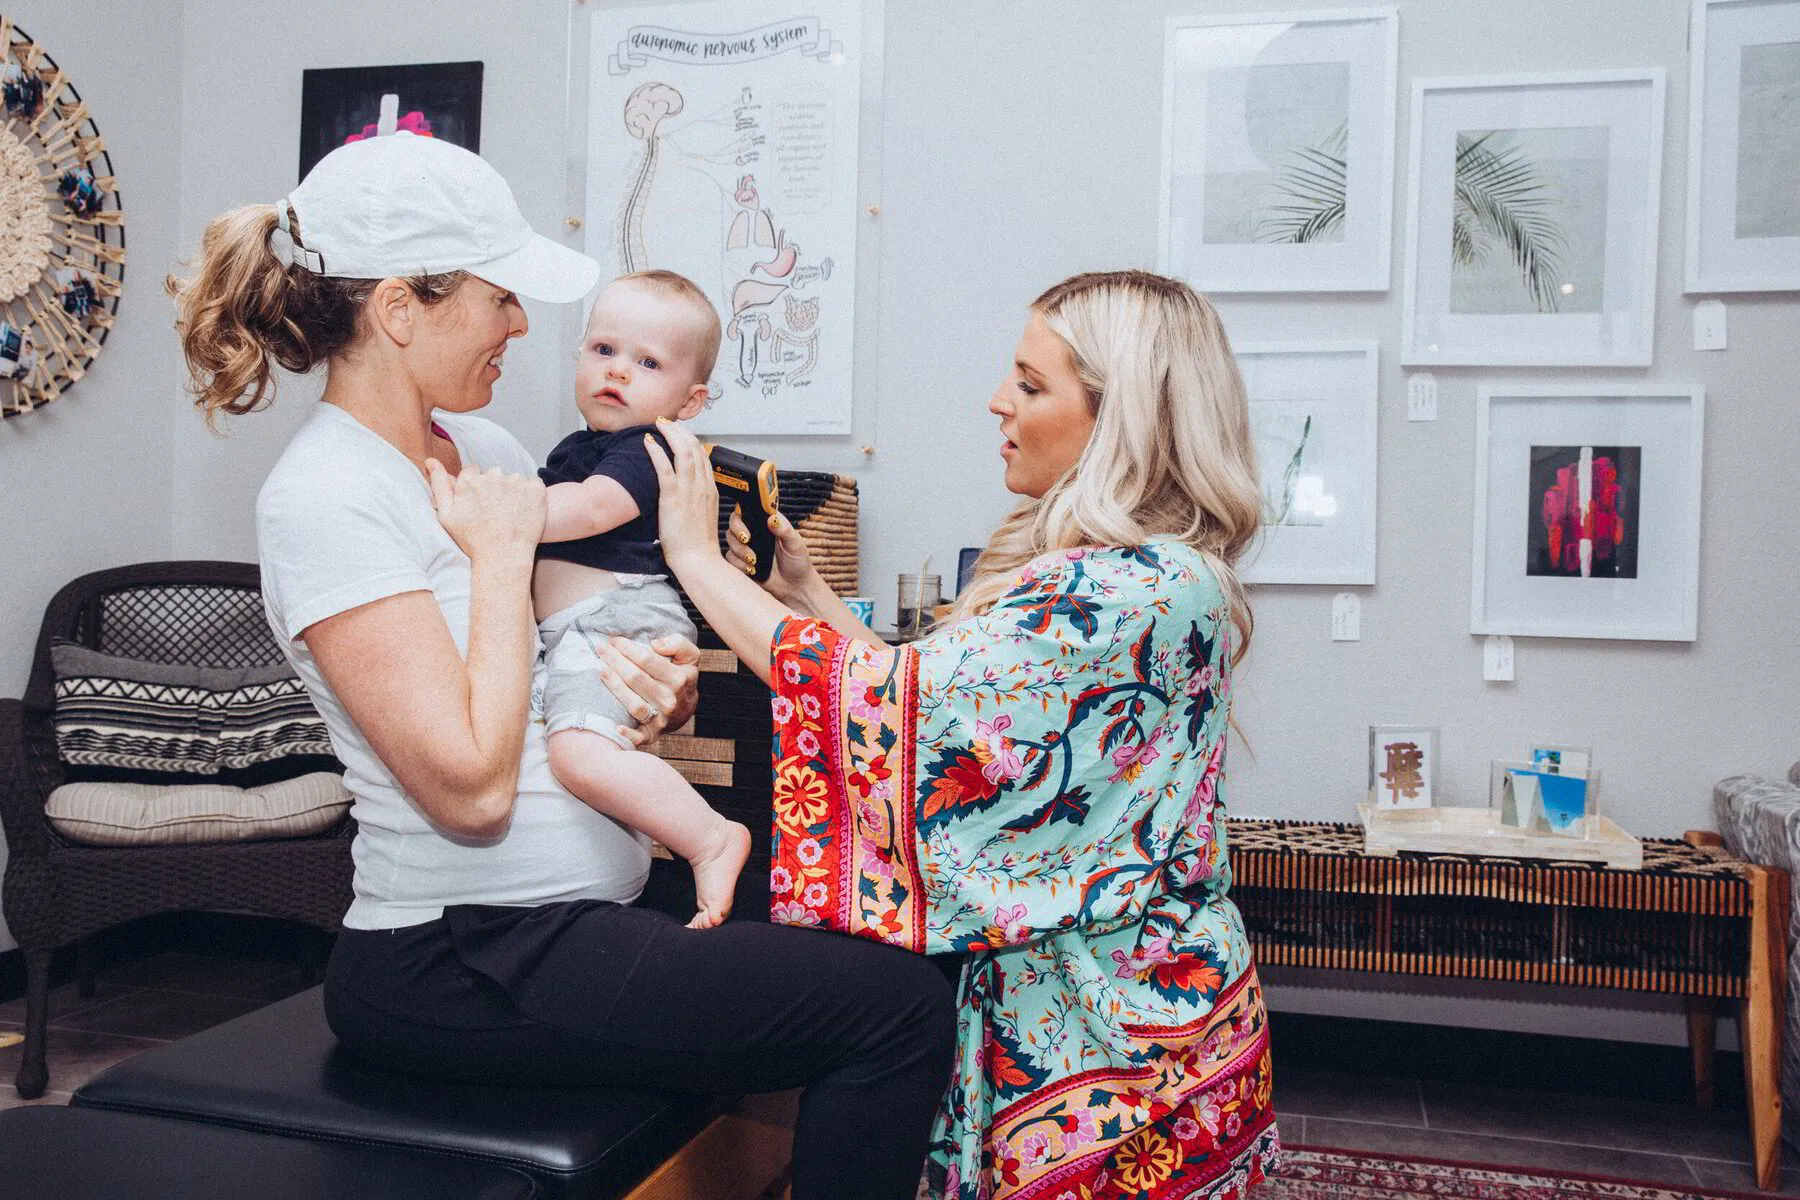 Dr. Morgan engages with a baby held by a smiling mother, reflecting a warm and comfortable chiropractic care experience